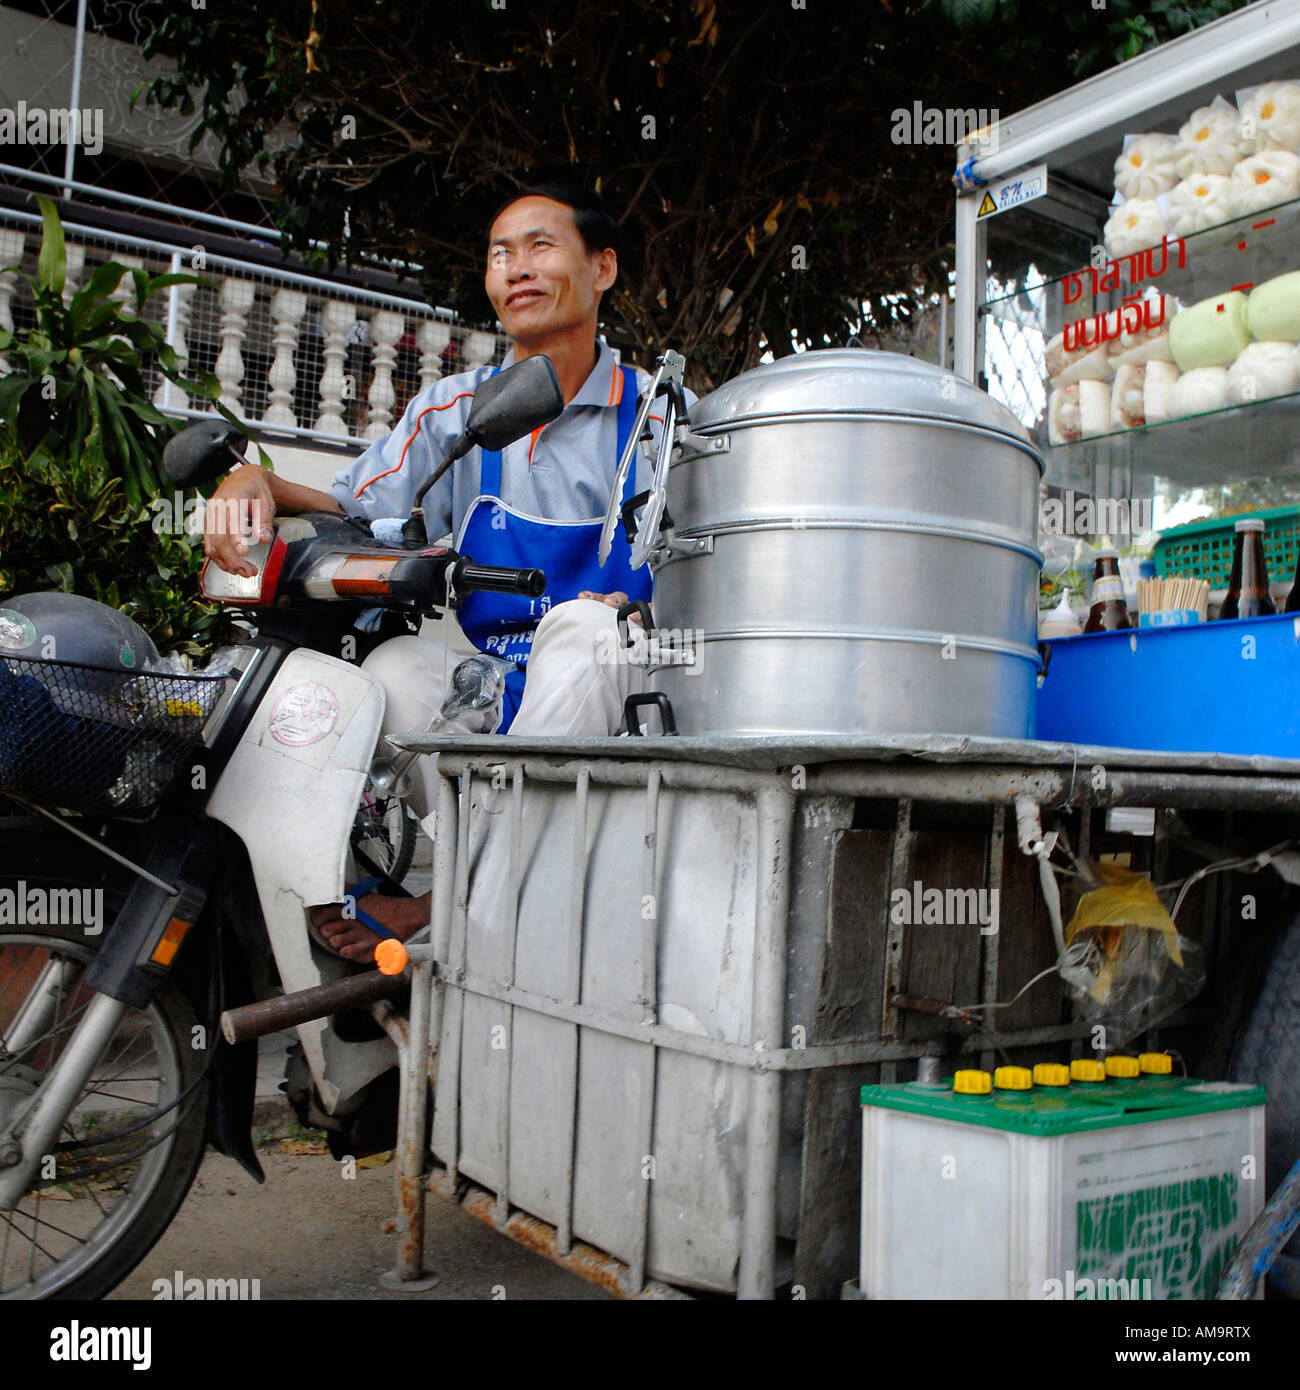 food vendor with stall on side of a motorbike, chiang mai, thailand Stock Photo